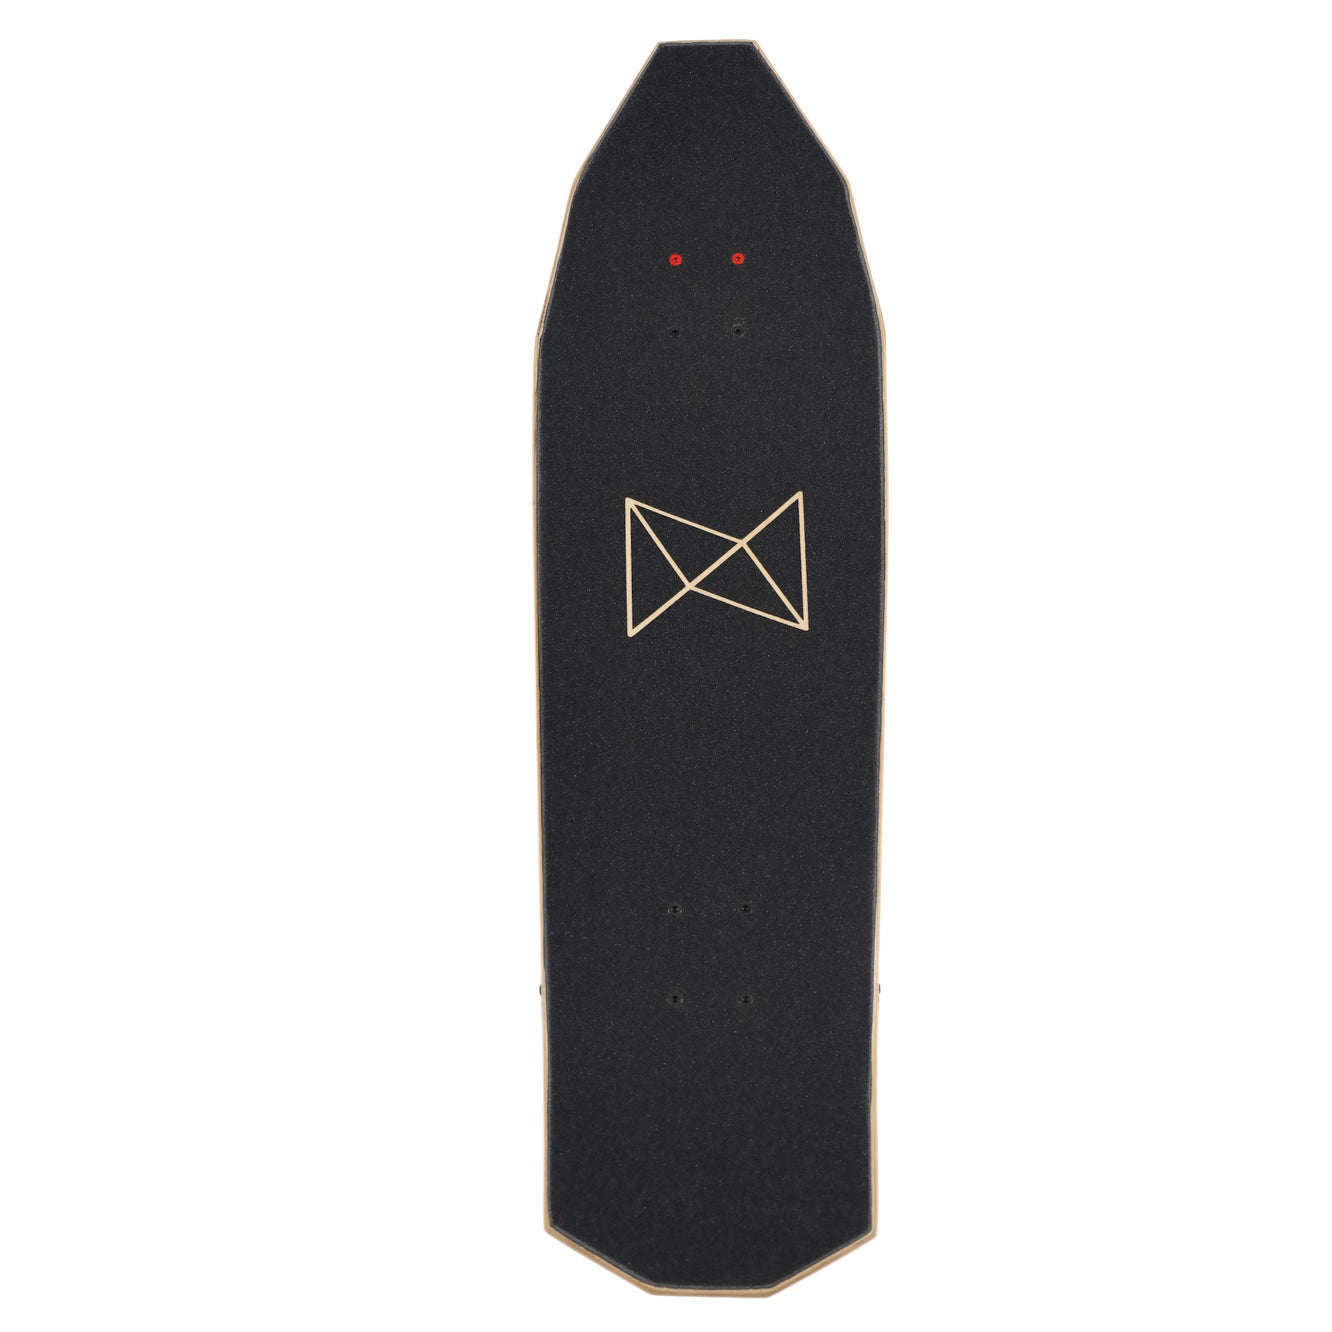 Cruiser NOTOX skateboard made in France top view